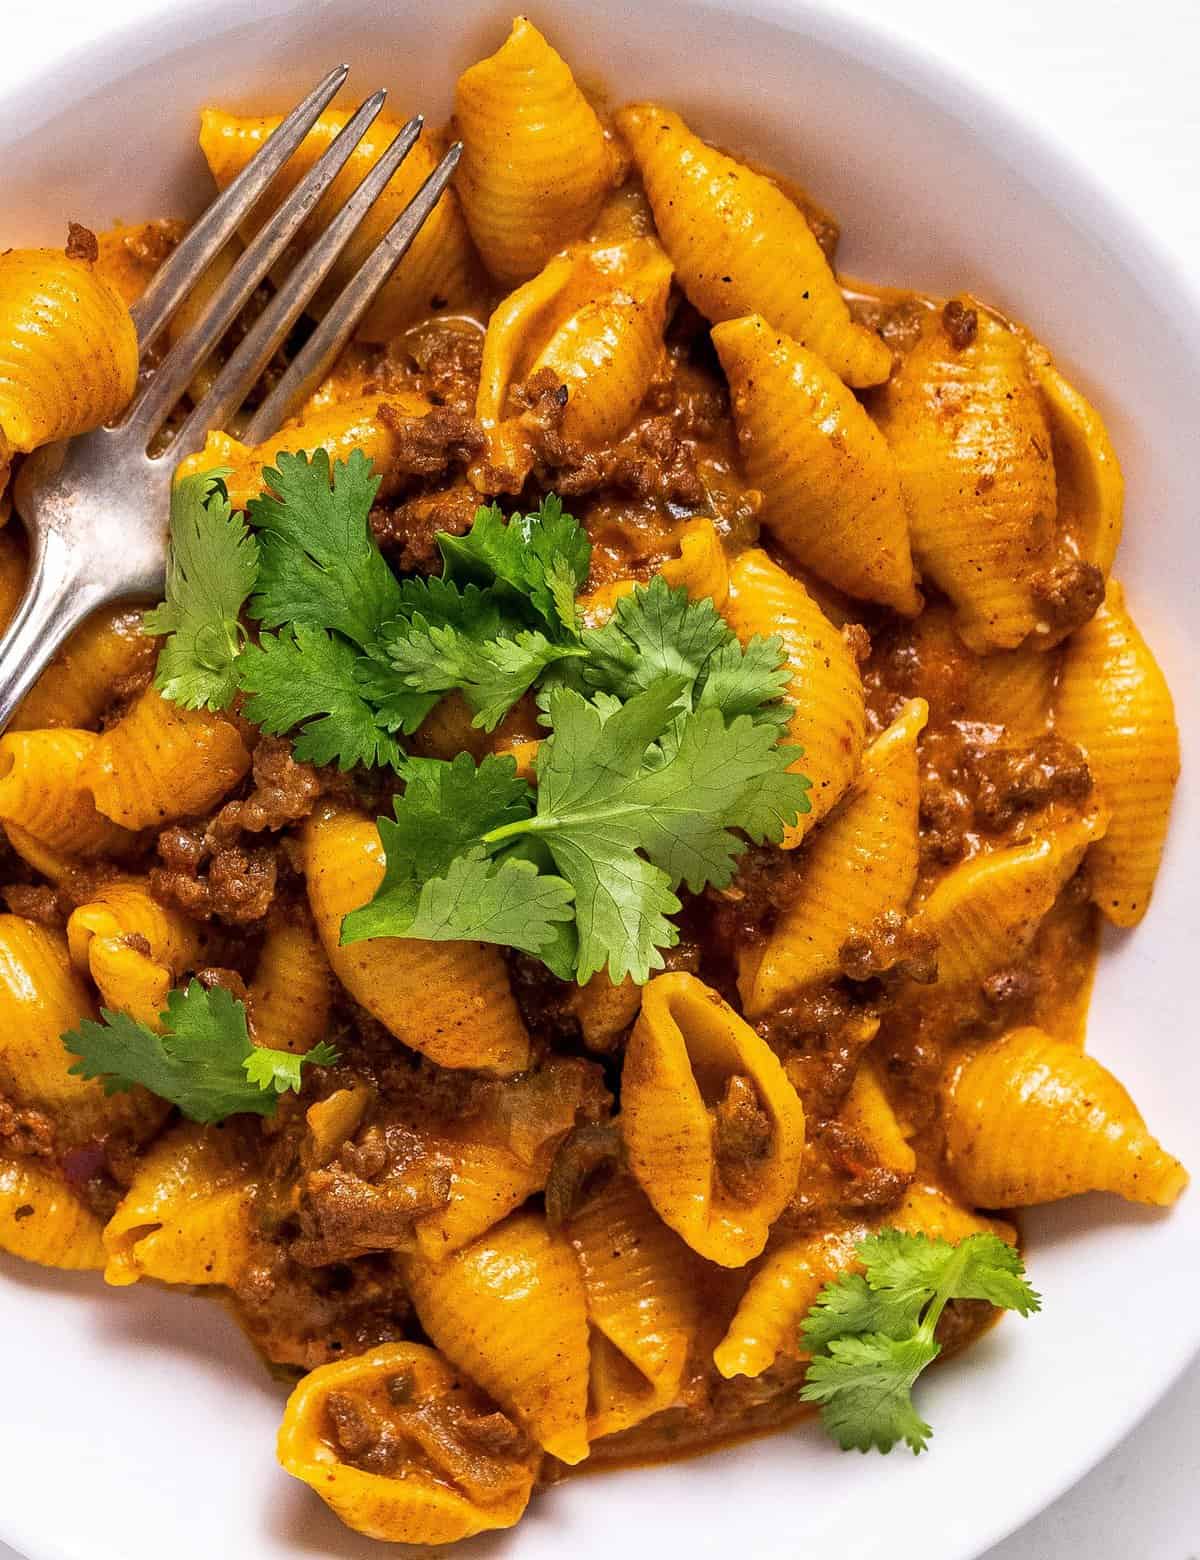 This taco pasta is a super simple one pot dinner that's hearty, cheesy, and made easily in the Instant Pot! The mild heat level makes this perfect for kids and families, but it's also easily customize-able!